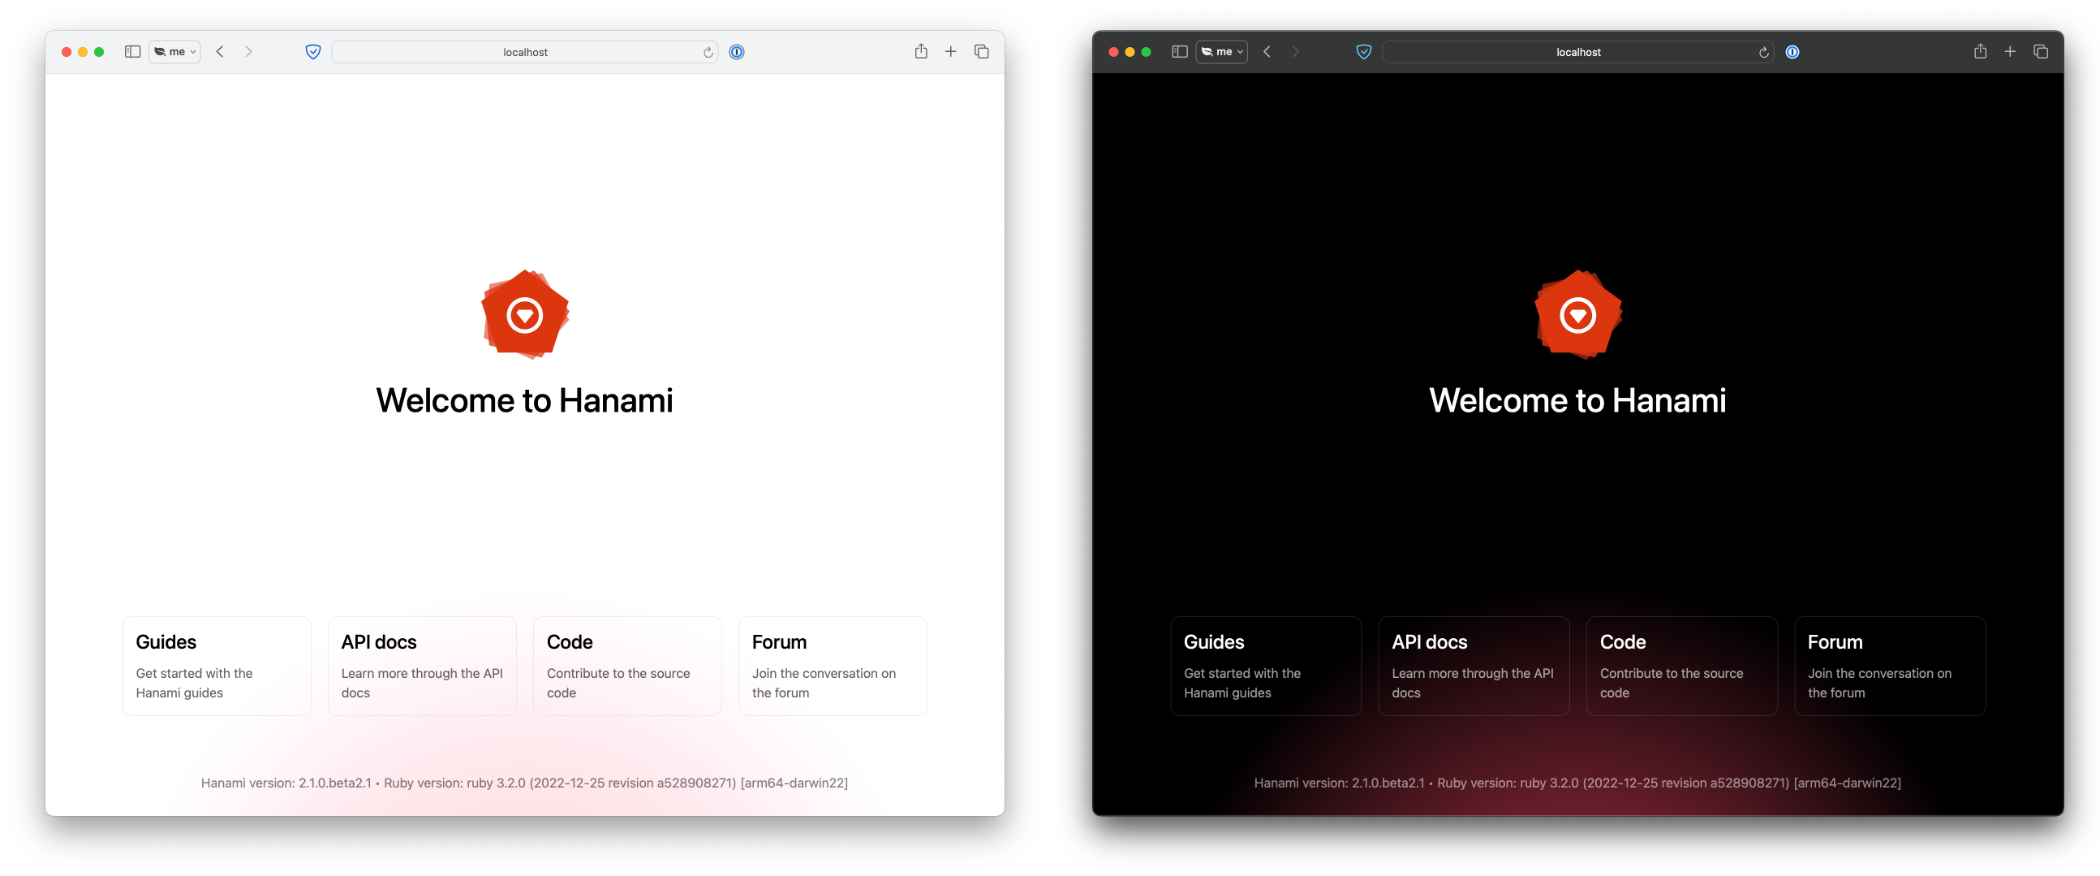 The new Hanami welcome page in light and dark mode